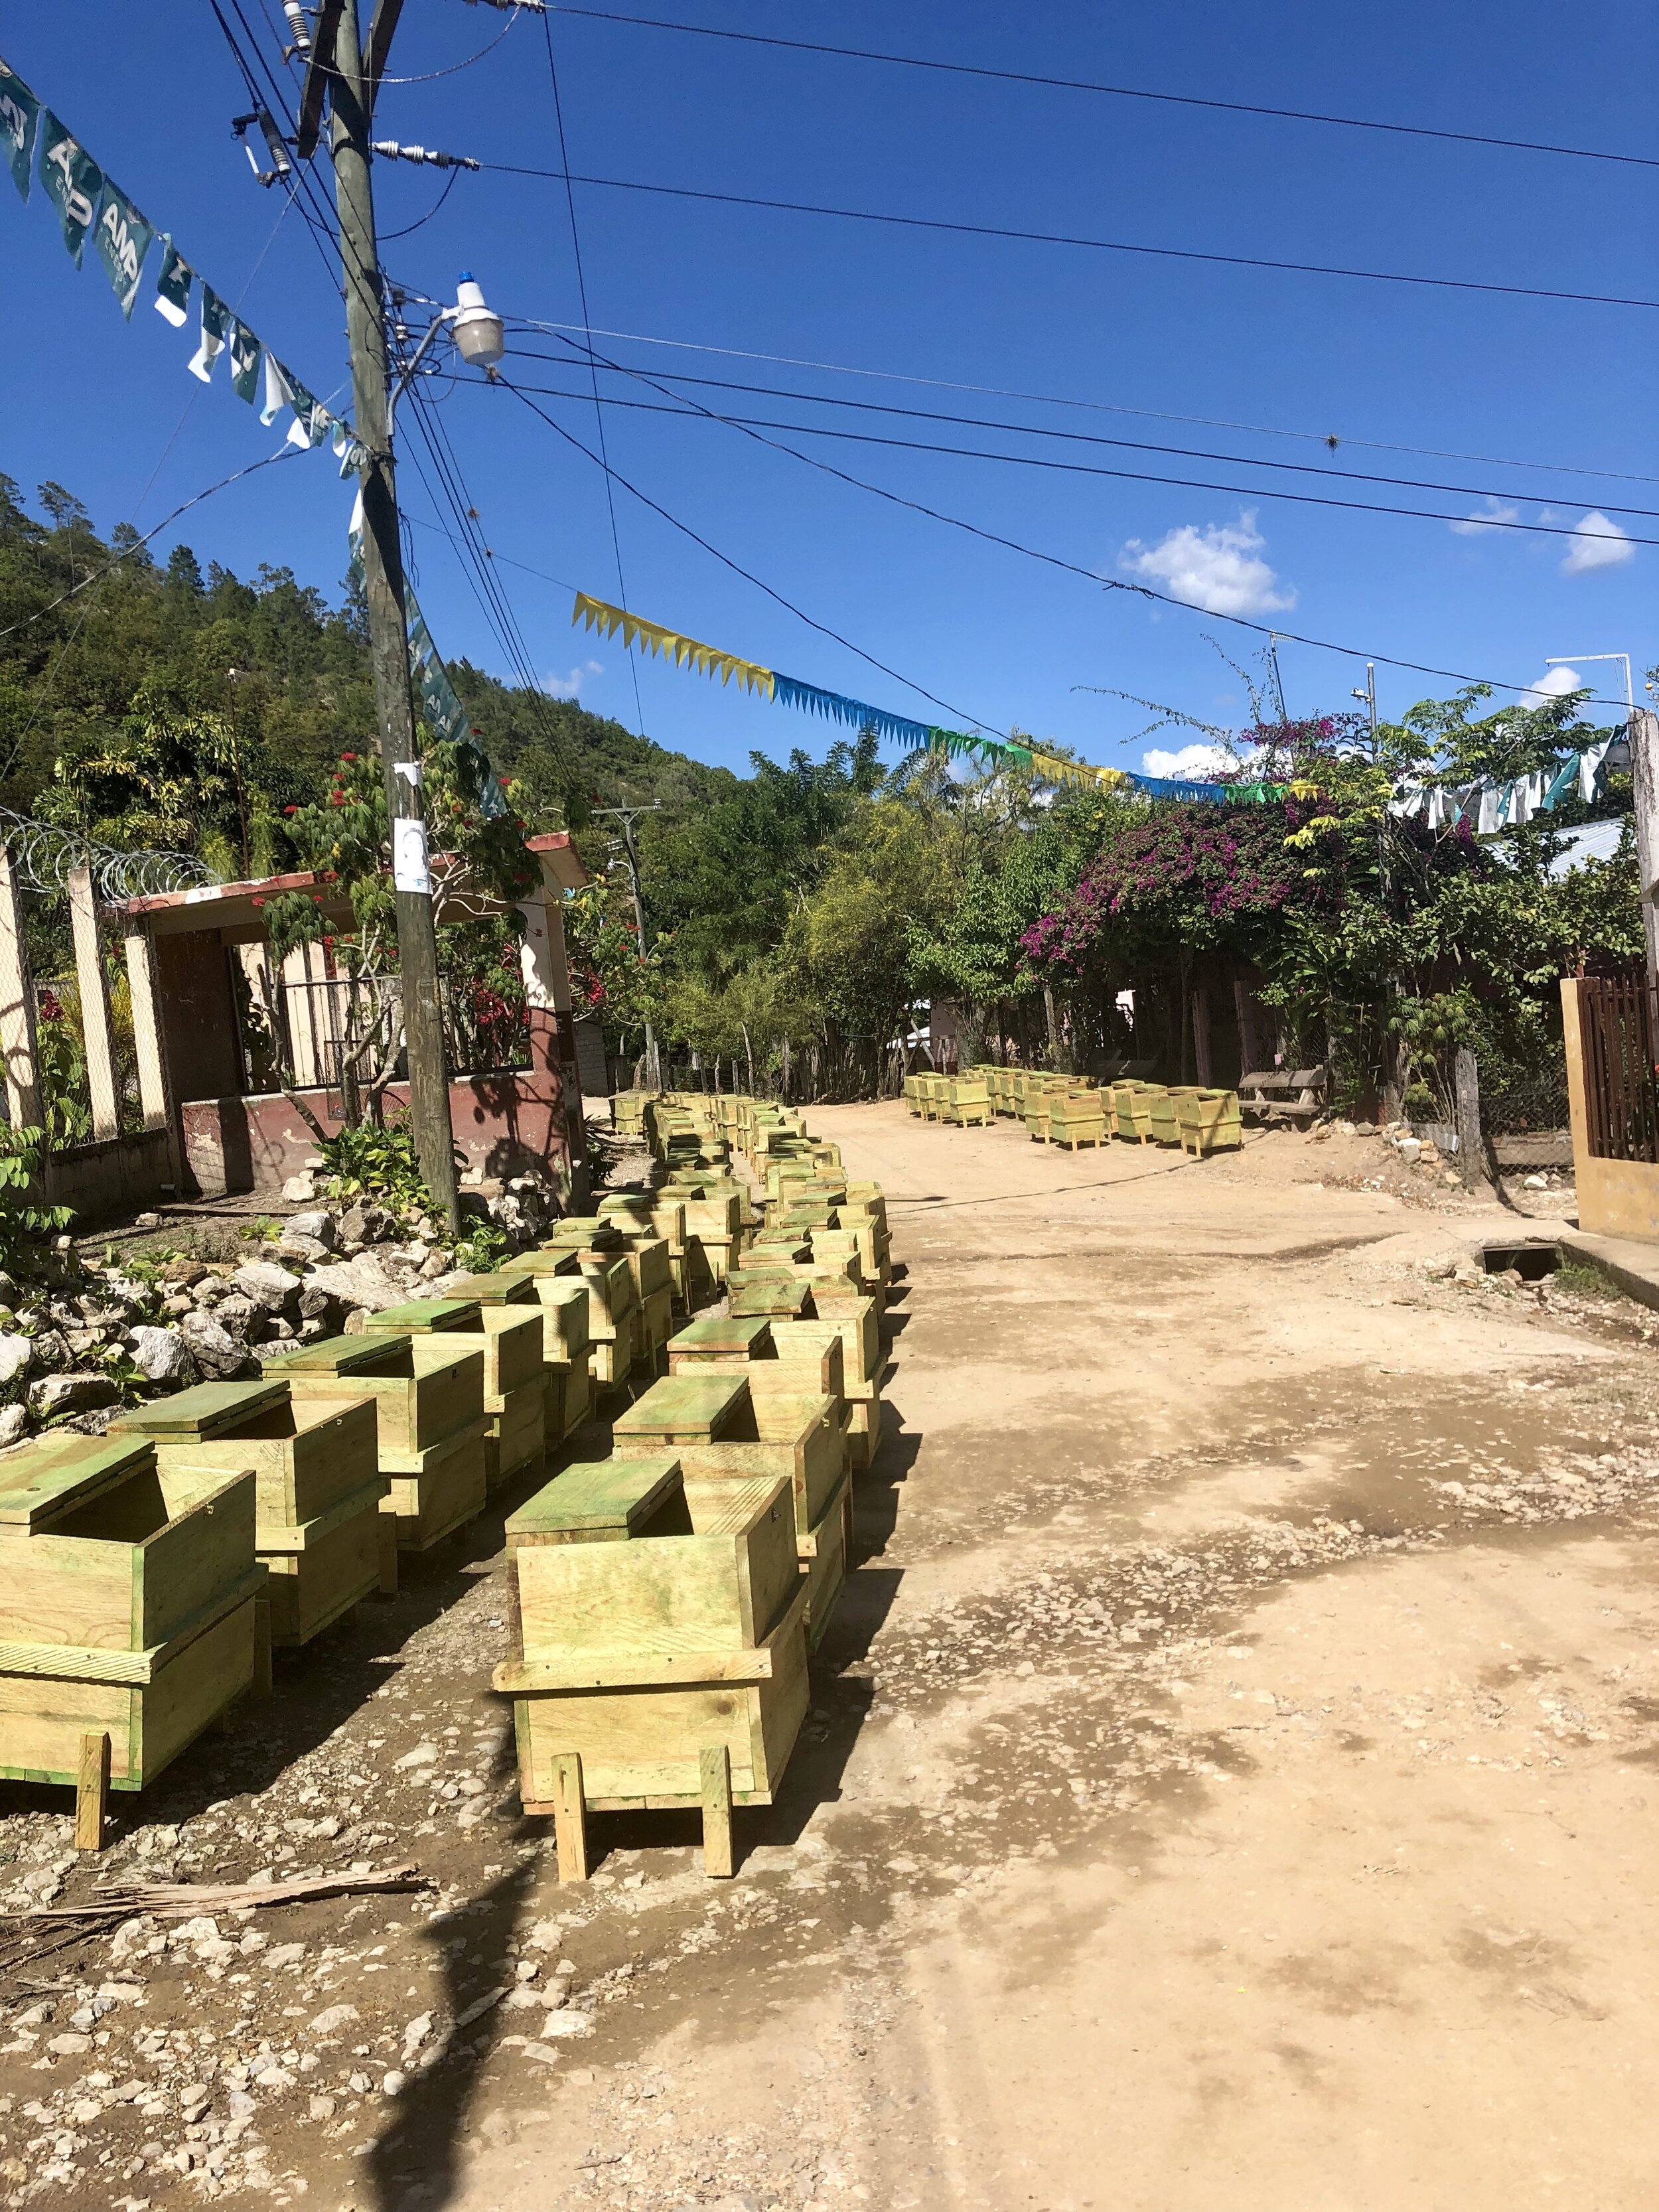 The 78 chemical storage boxes ready to be distributed to families in El Rosario.